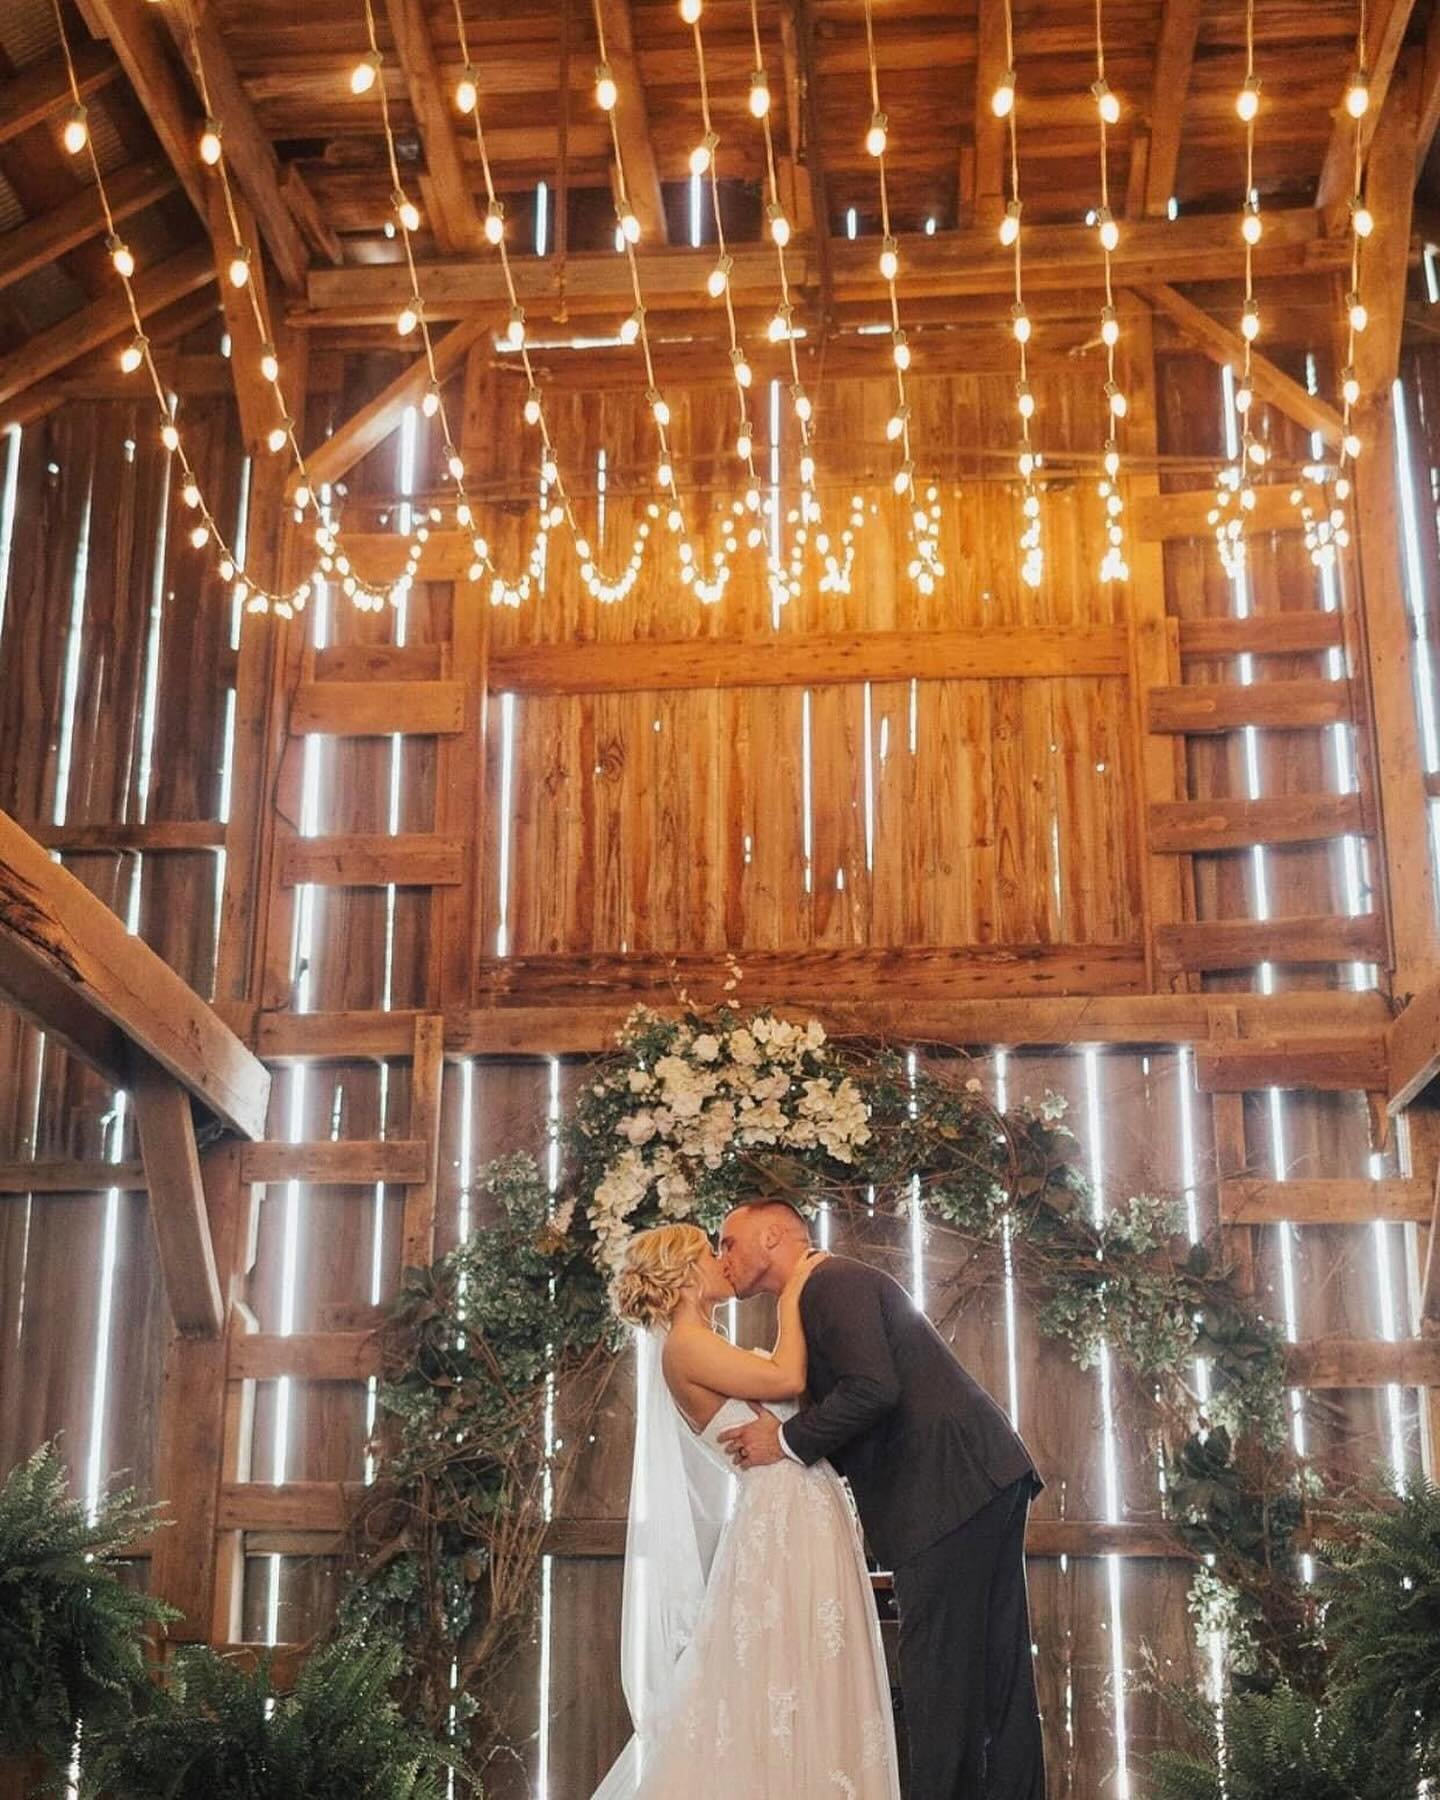 I love when our couples post anniversary pictures and you get to see joy and true happiness all over again. Happy 5year anniversary @lexieeejo! To reserve your big day with us, message/email us to schedule your private tour ❤️#thebarnonboundary #barn